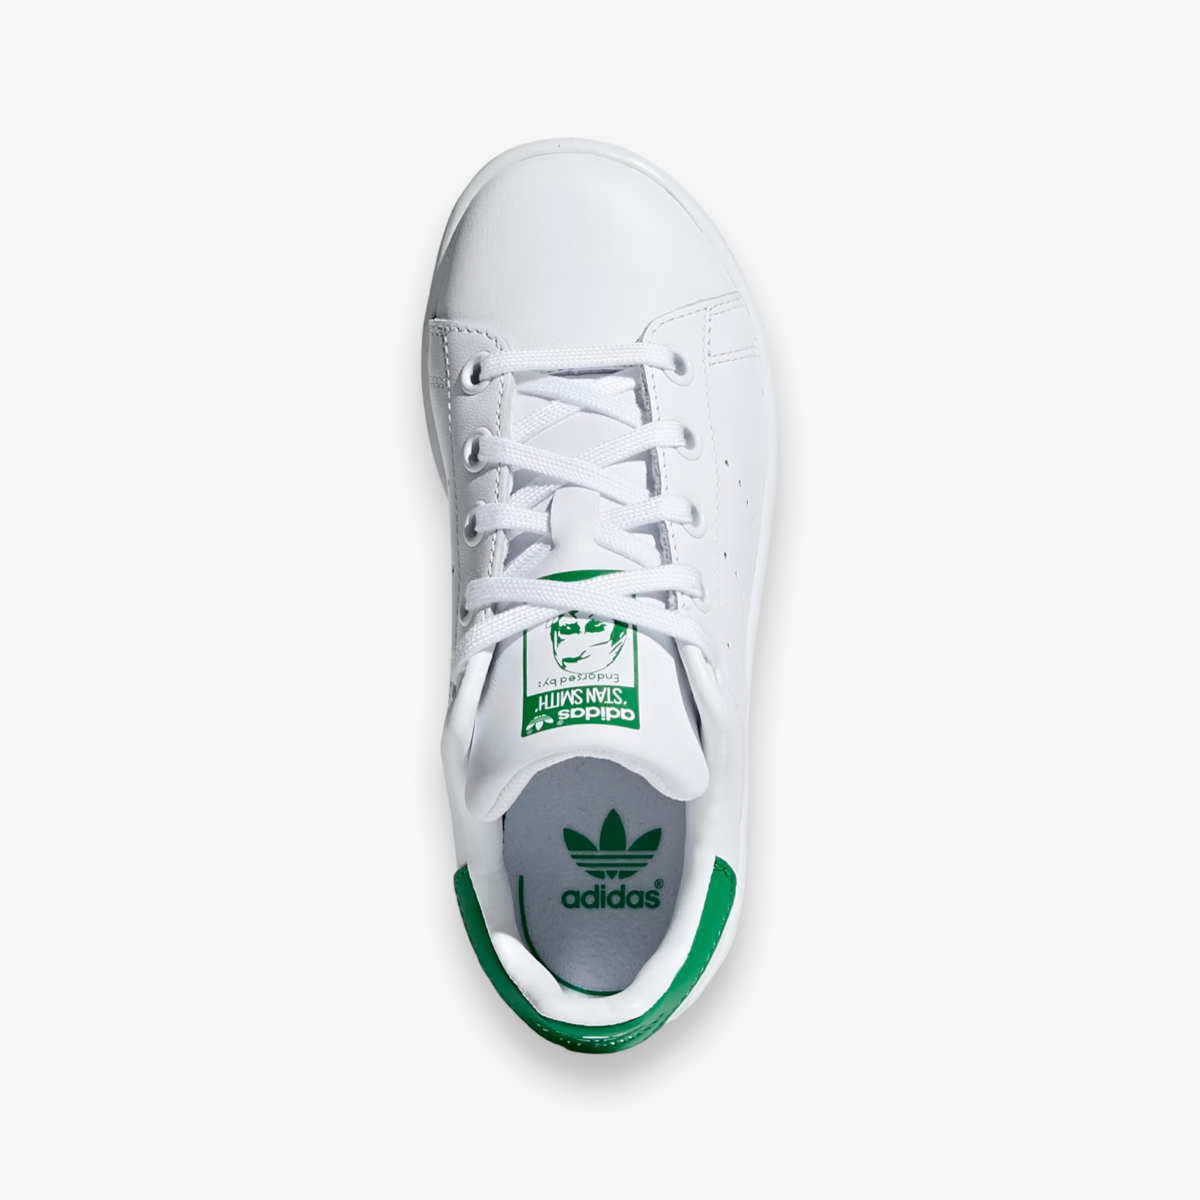 Stan Smith PS